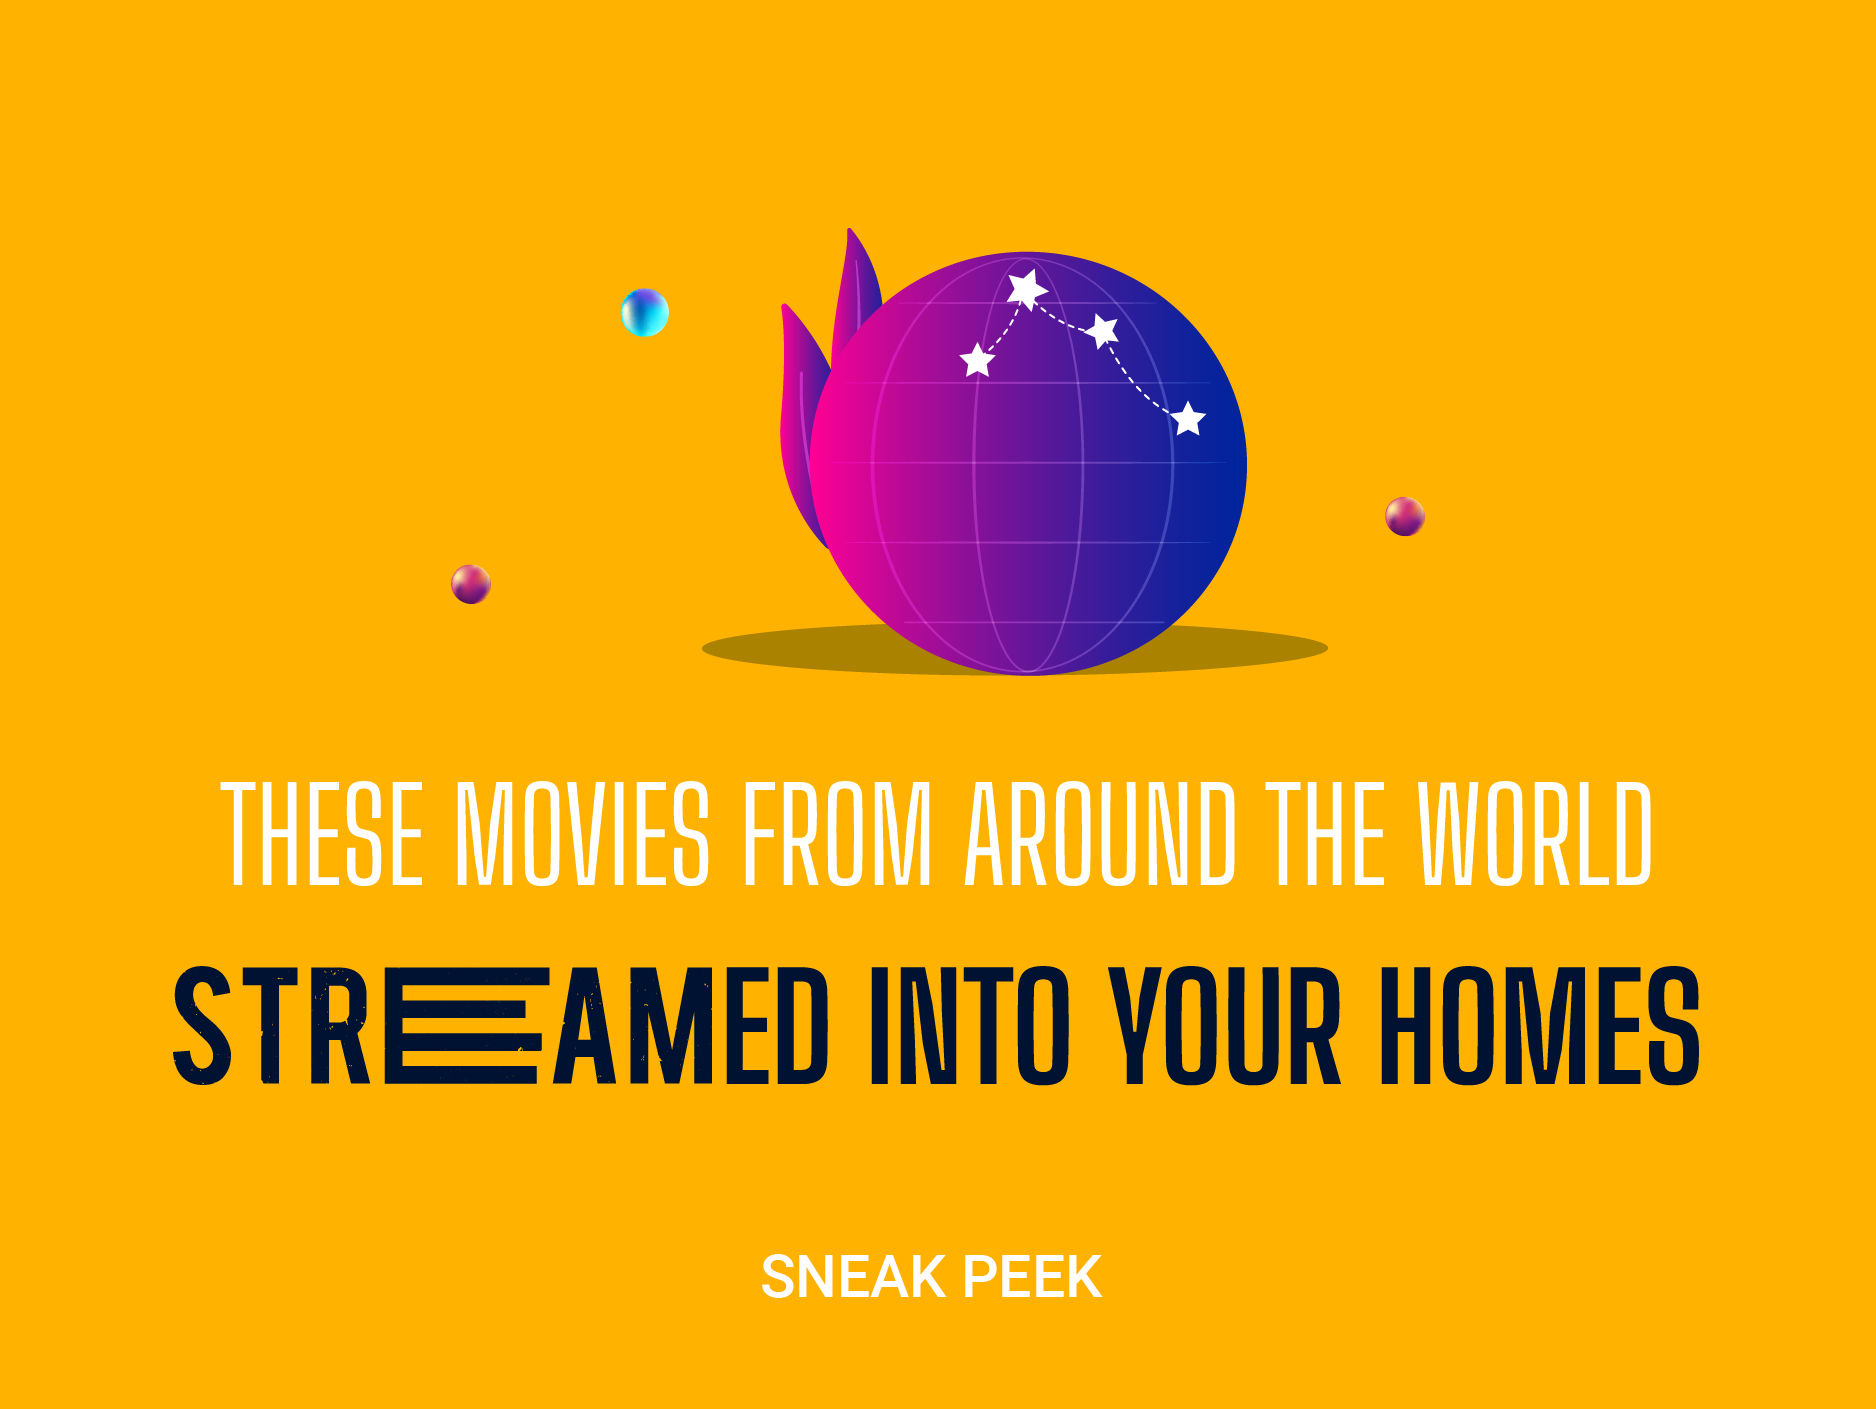 These movies from around the world streamed into your homes